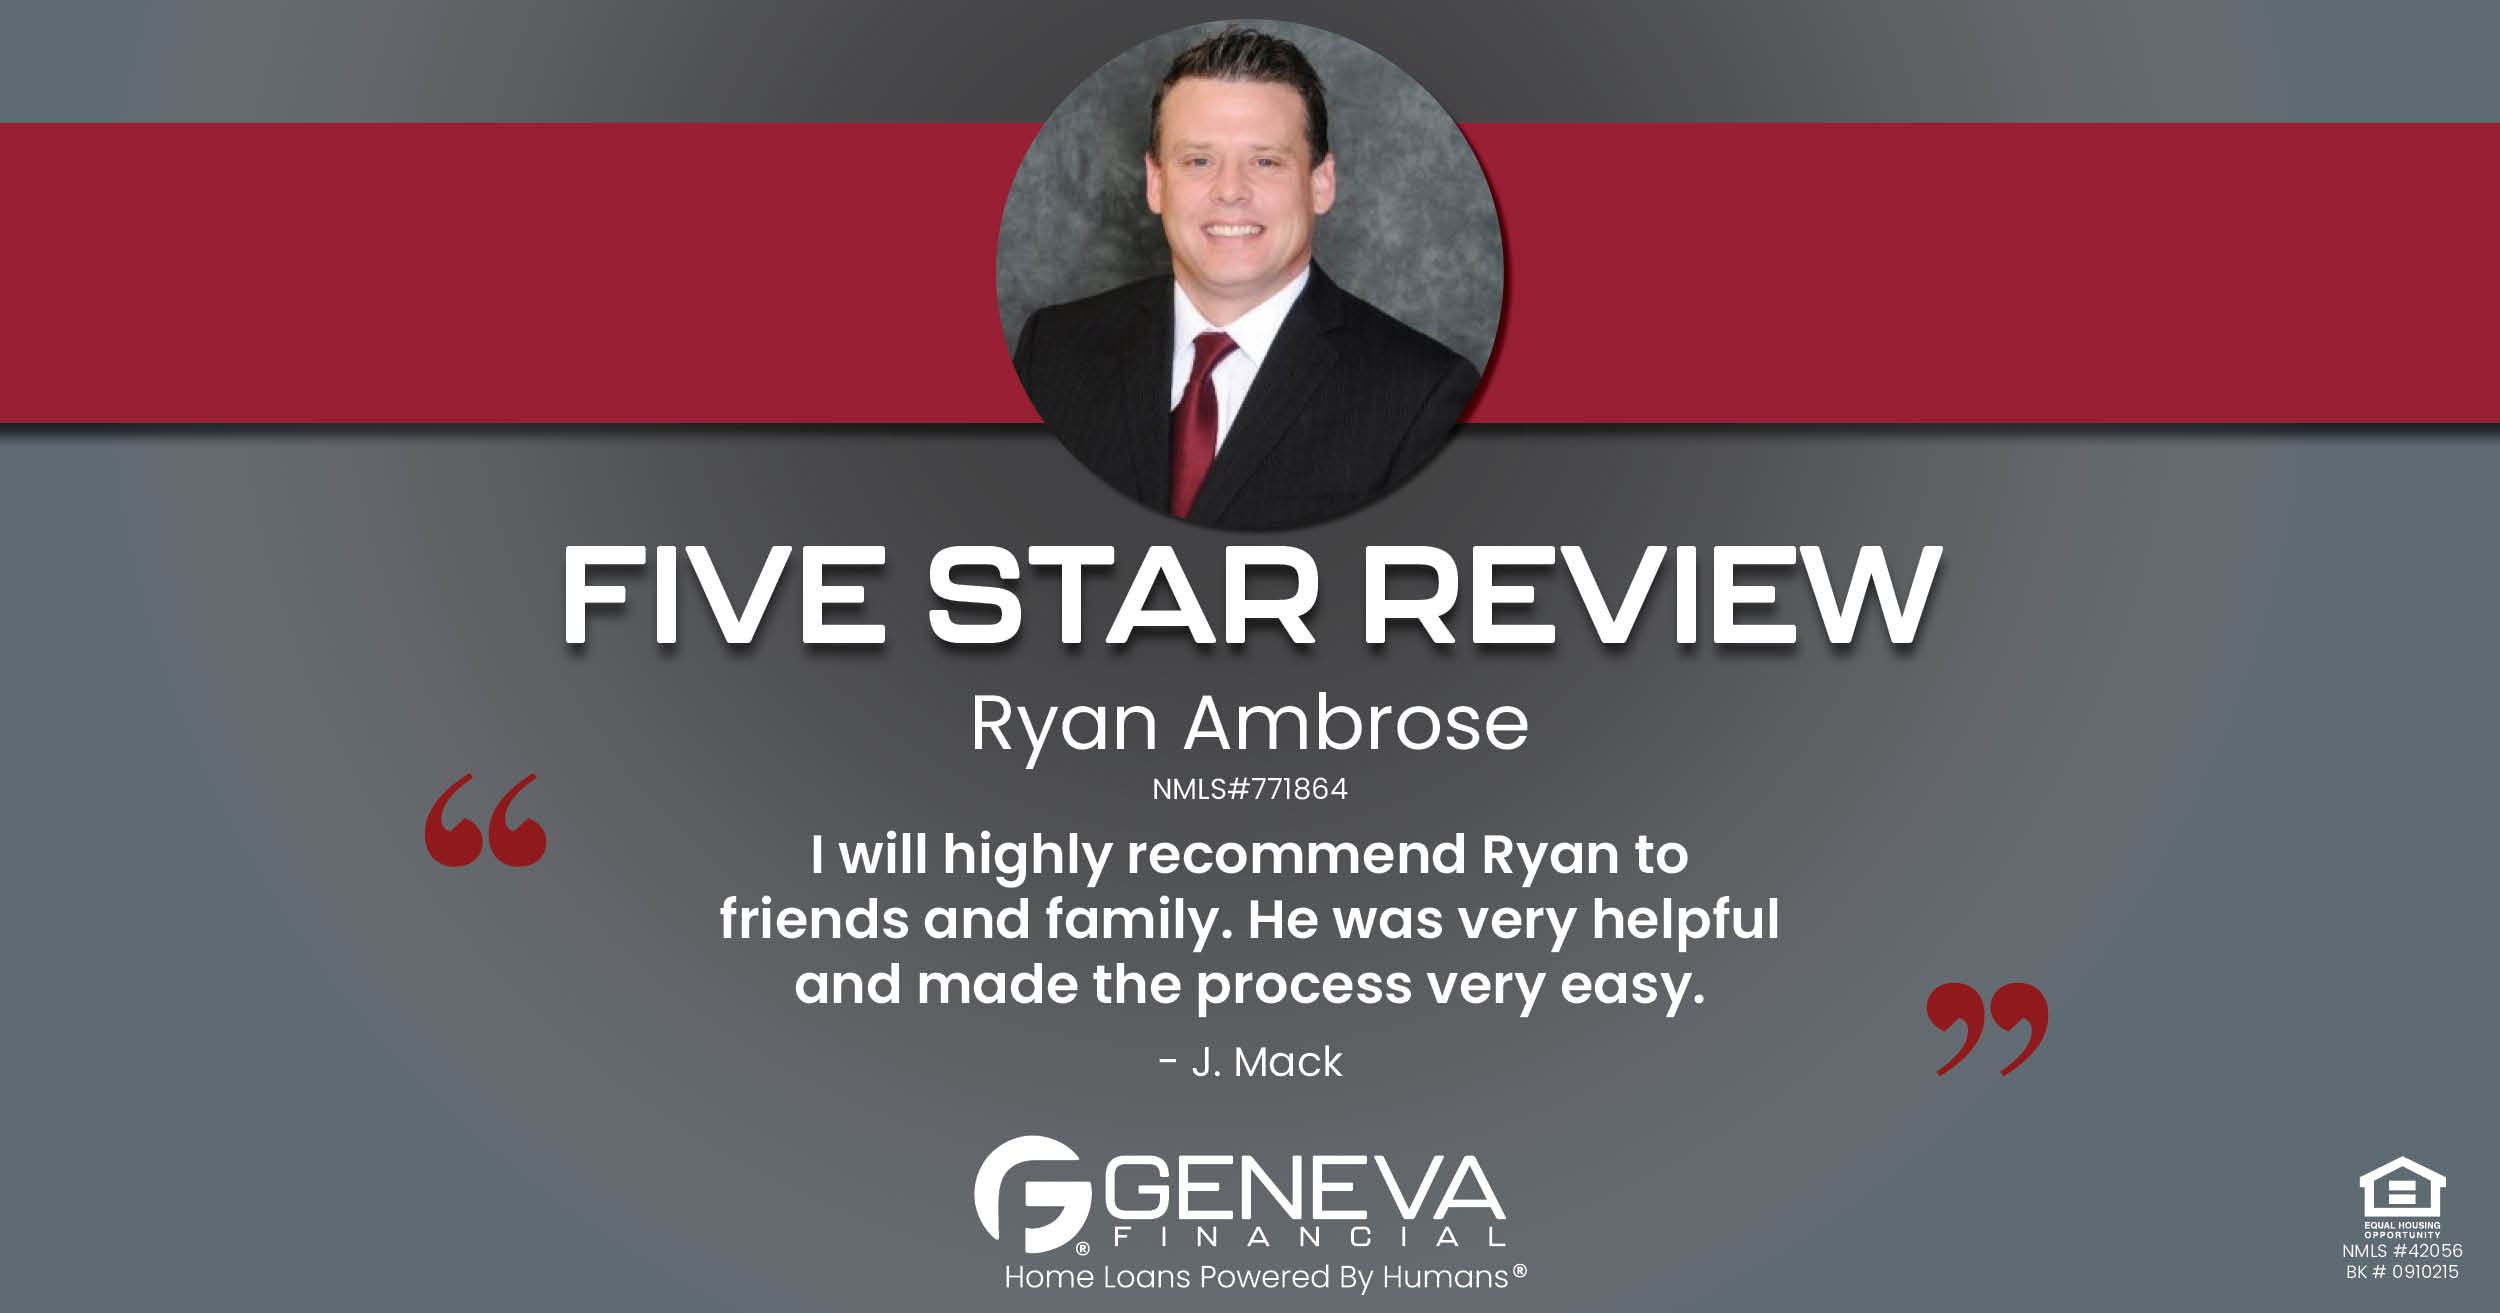 5 Star Review for Ryan Ambrose, Licensed Mortgage Branch Sales Manager with Geneva Financial, Brunswick, Ohio – Home Loans Powered by Humans®.